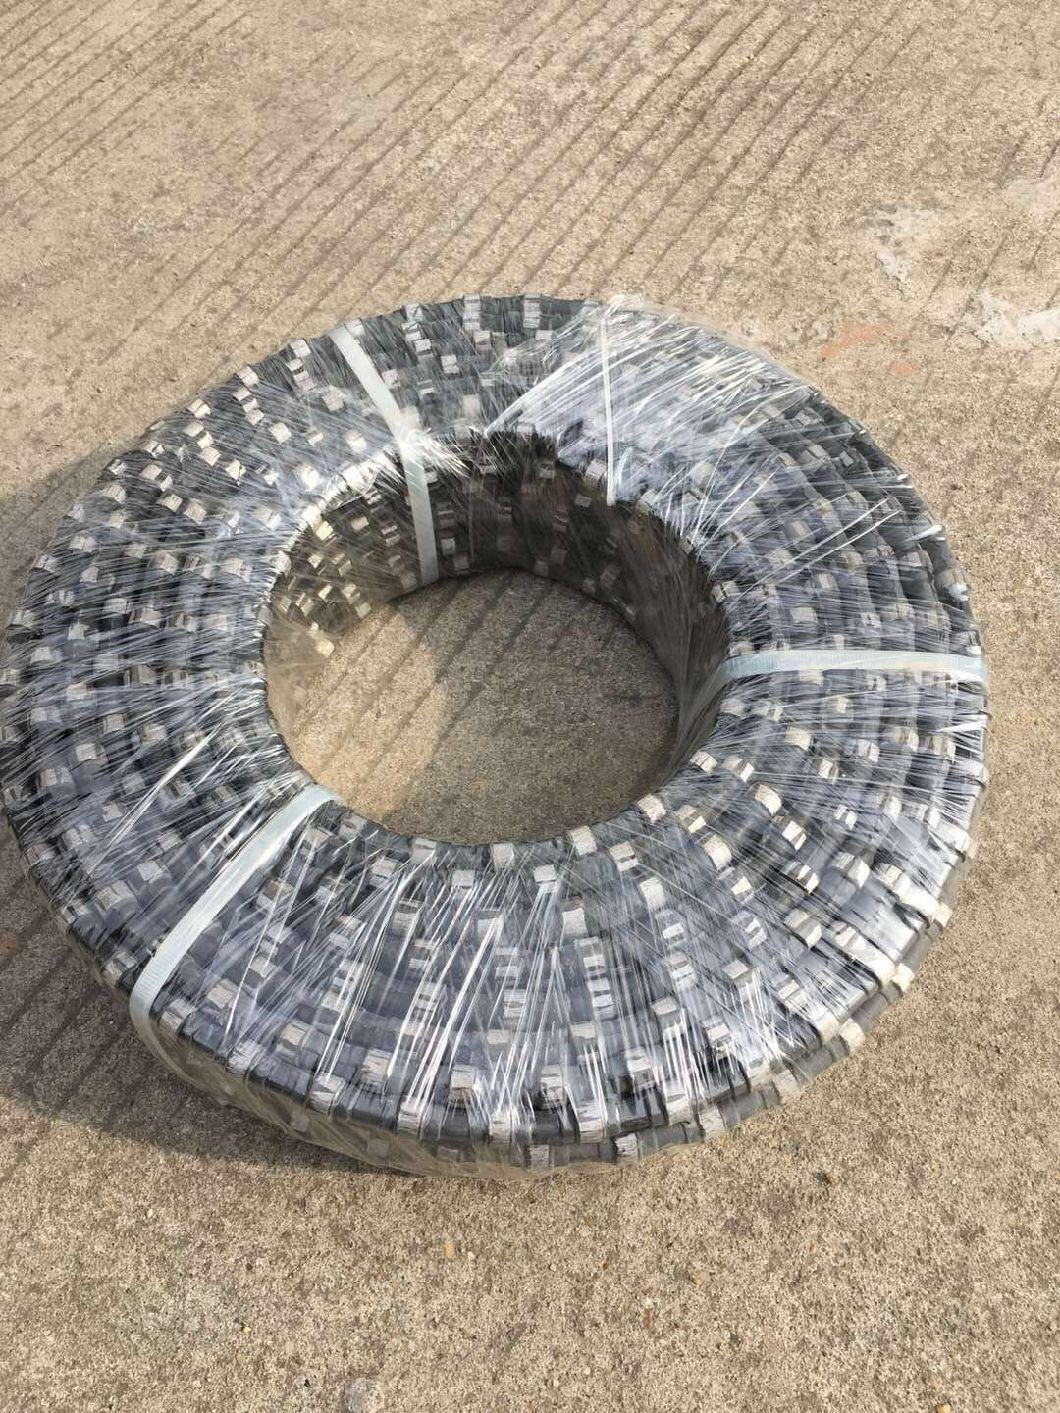 Long Life Span Wire Saw Diamond Cutting Wire Saw for Granite Block